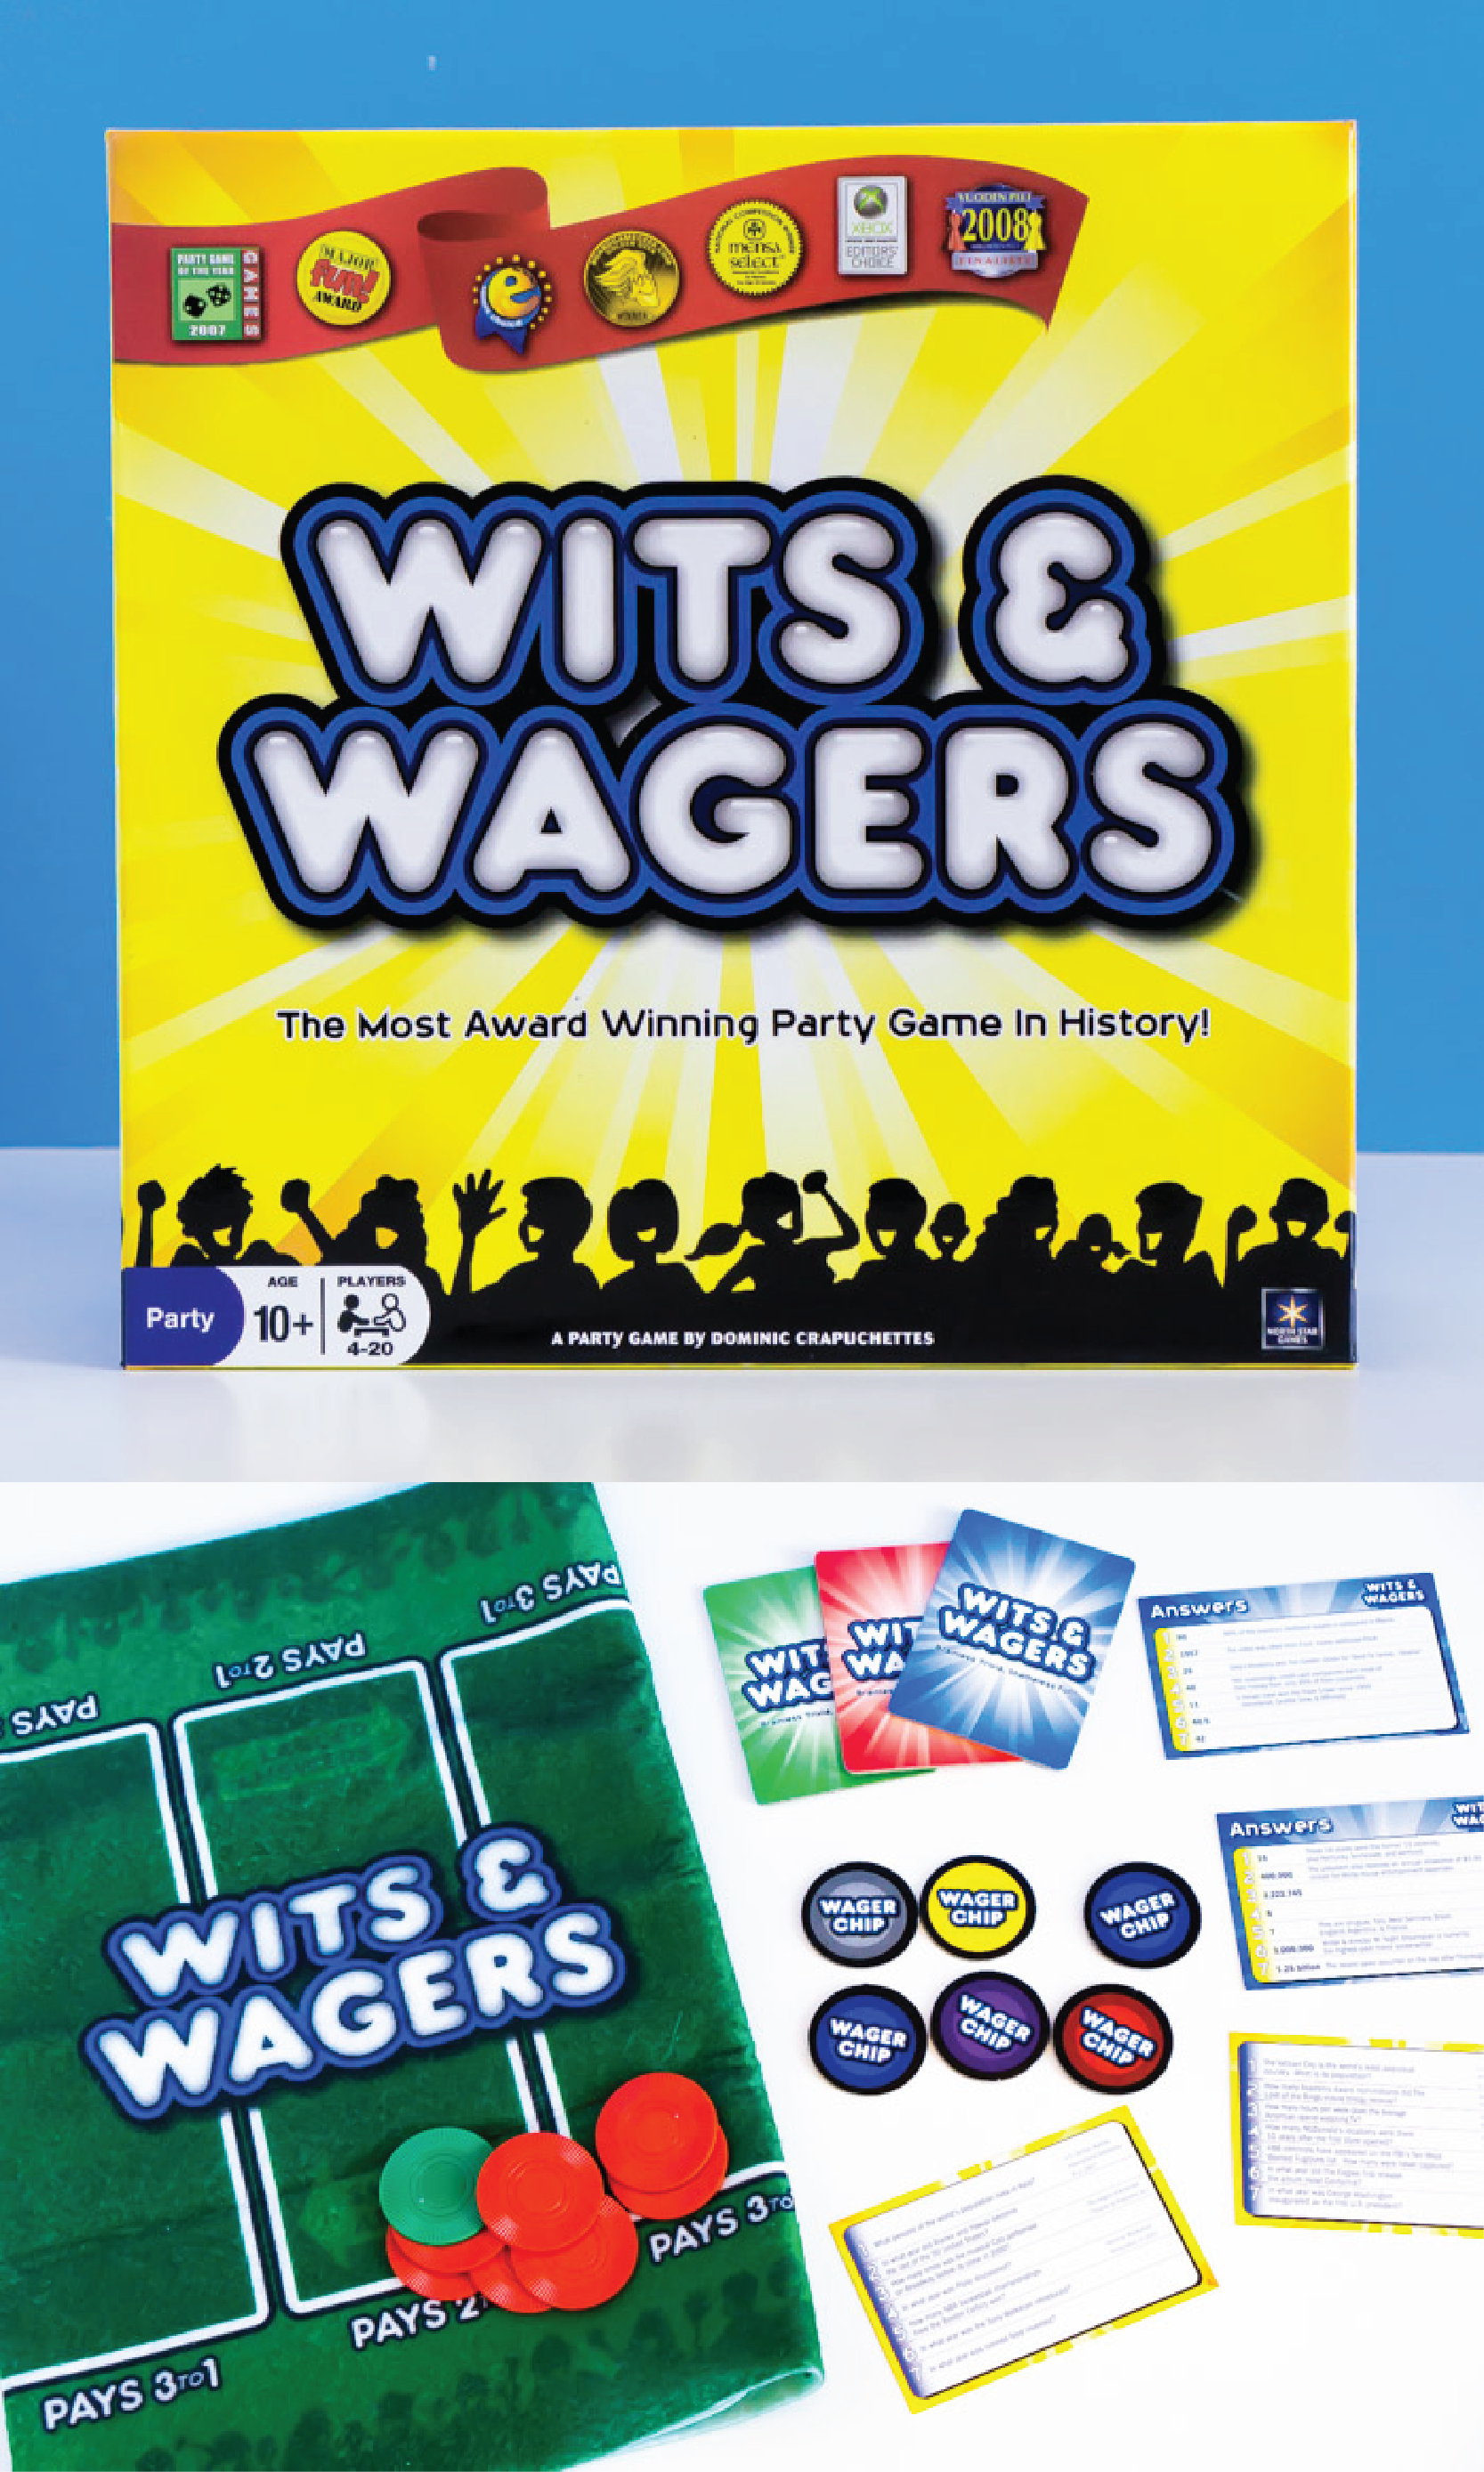 Wits and Wagers is one of the more risky board games for adults